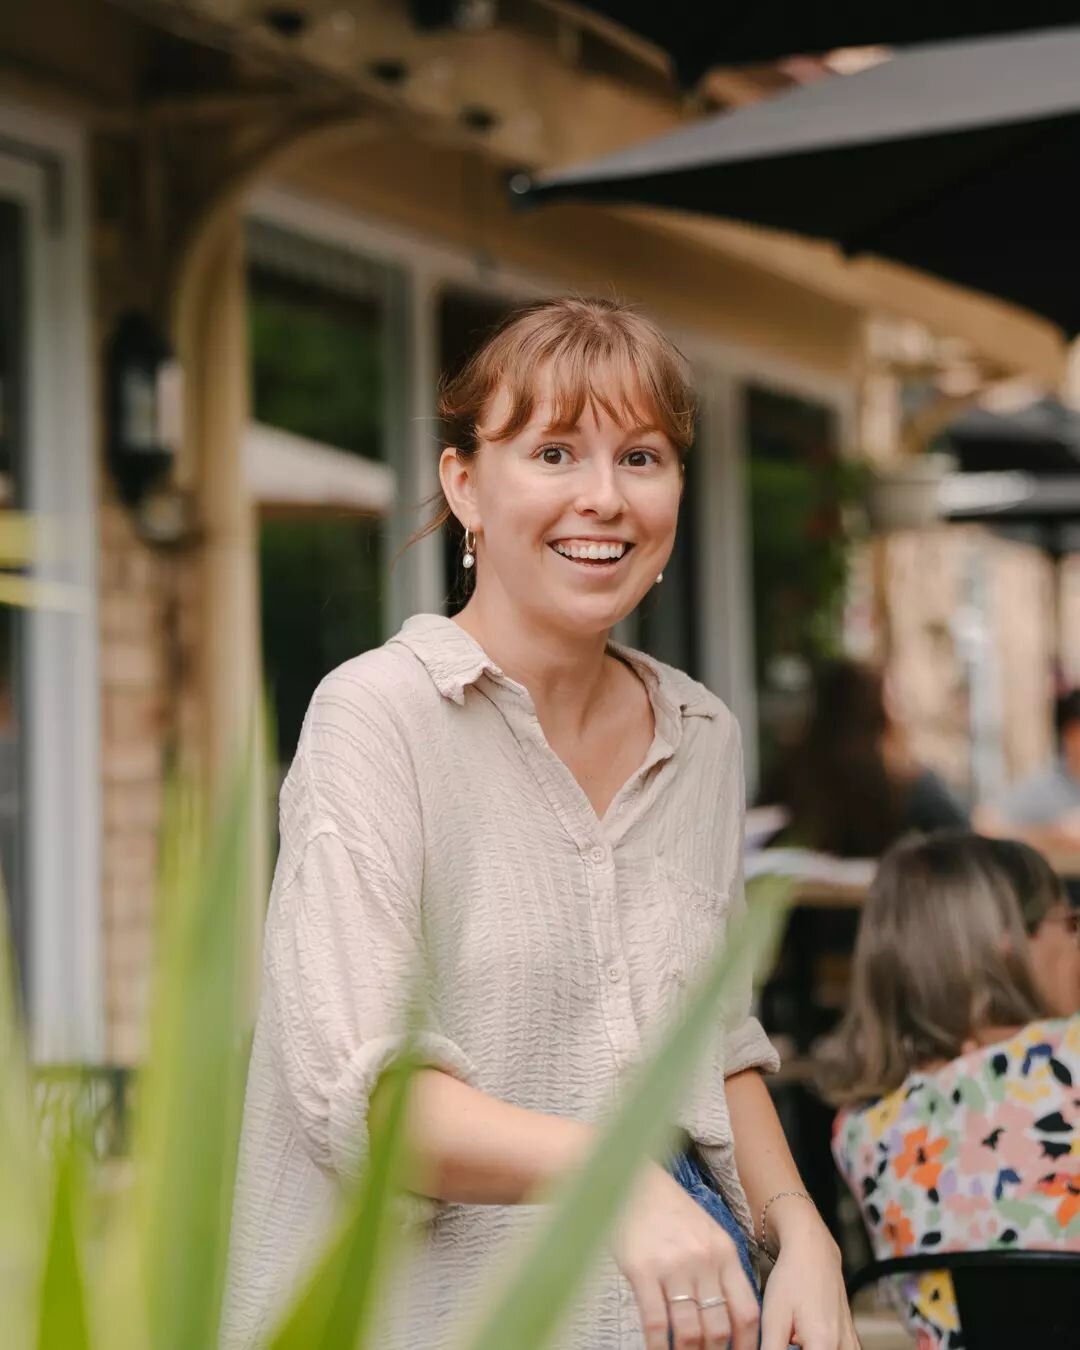 Sunny days at Concept Coffee come with Tilly's bright smile and your favourite cuppa! 🌞✨ There's nothing quite like that familiar warmth, both in greeting and in your mug. 

#CosyCafe #Maleny #SunshineCoastHinterland #WarmWelcomes #FriendlyFaces #Yo